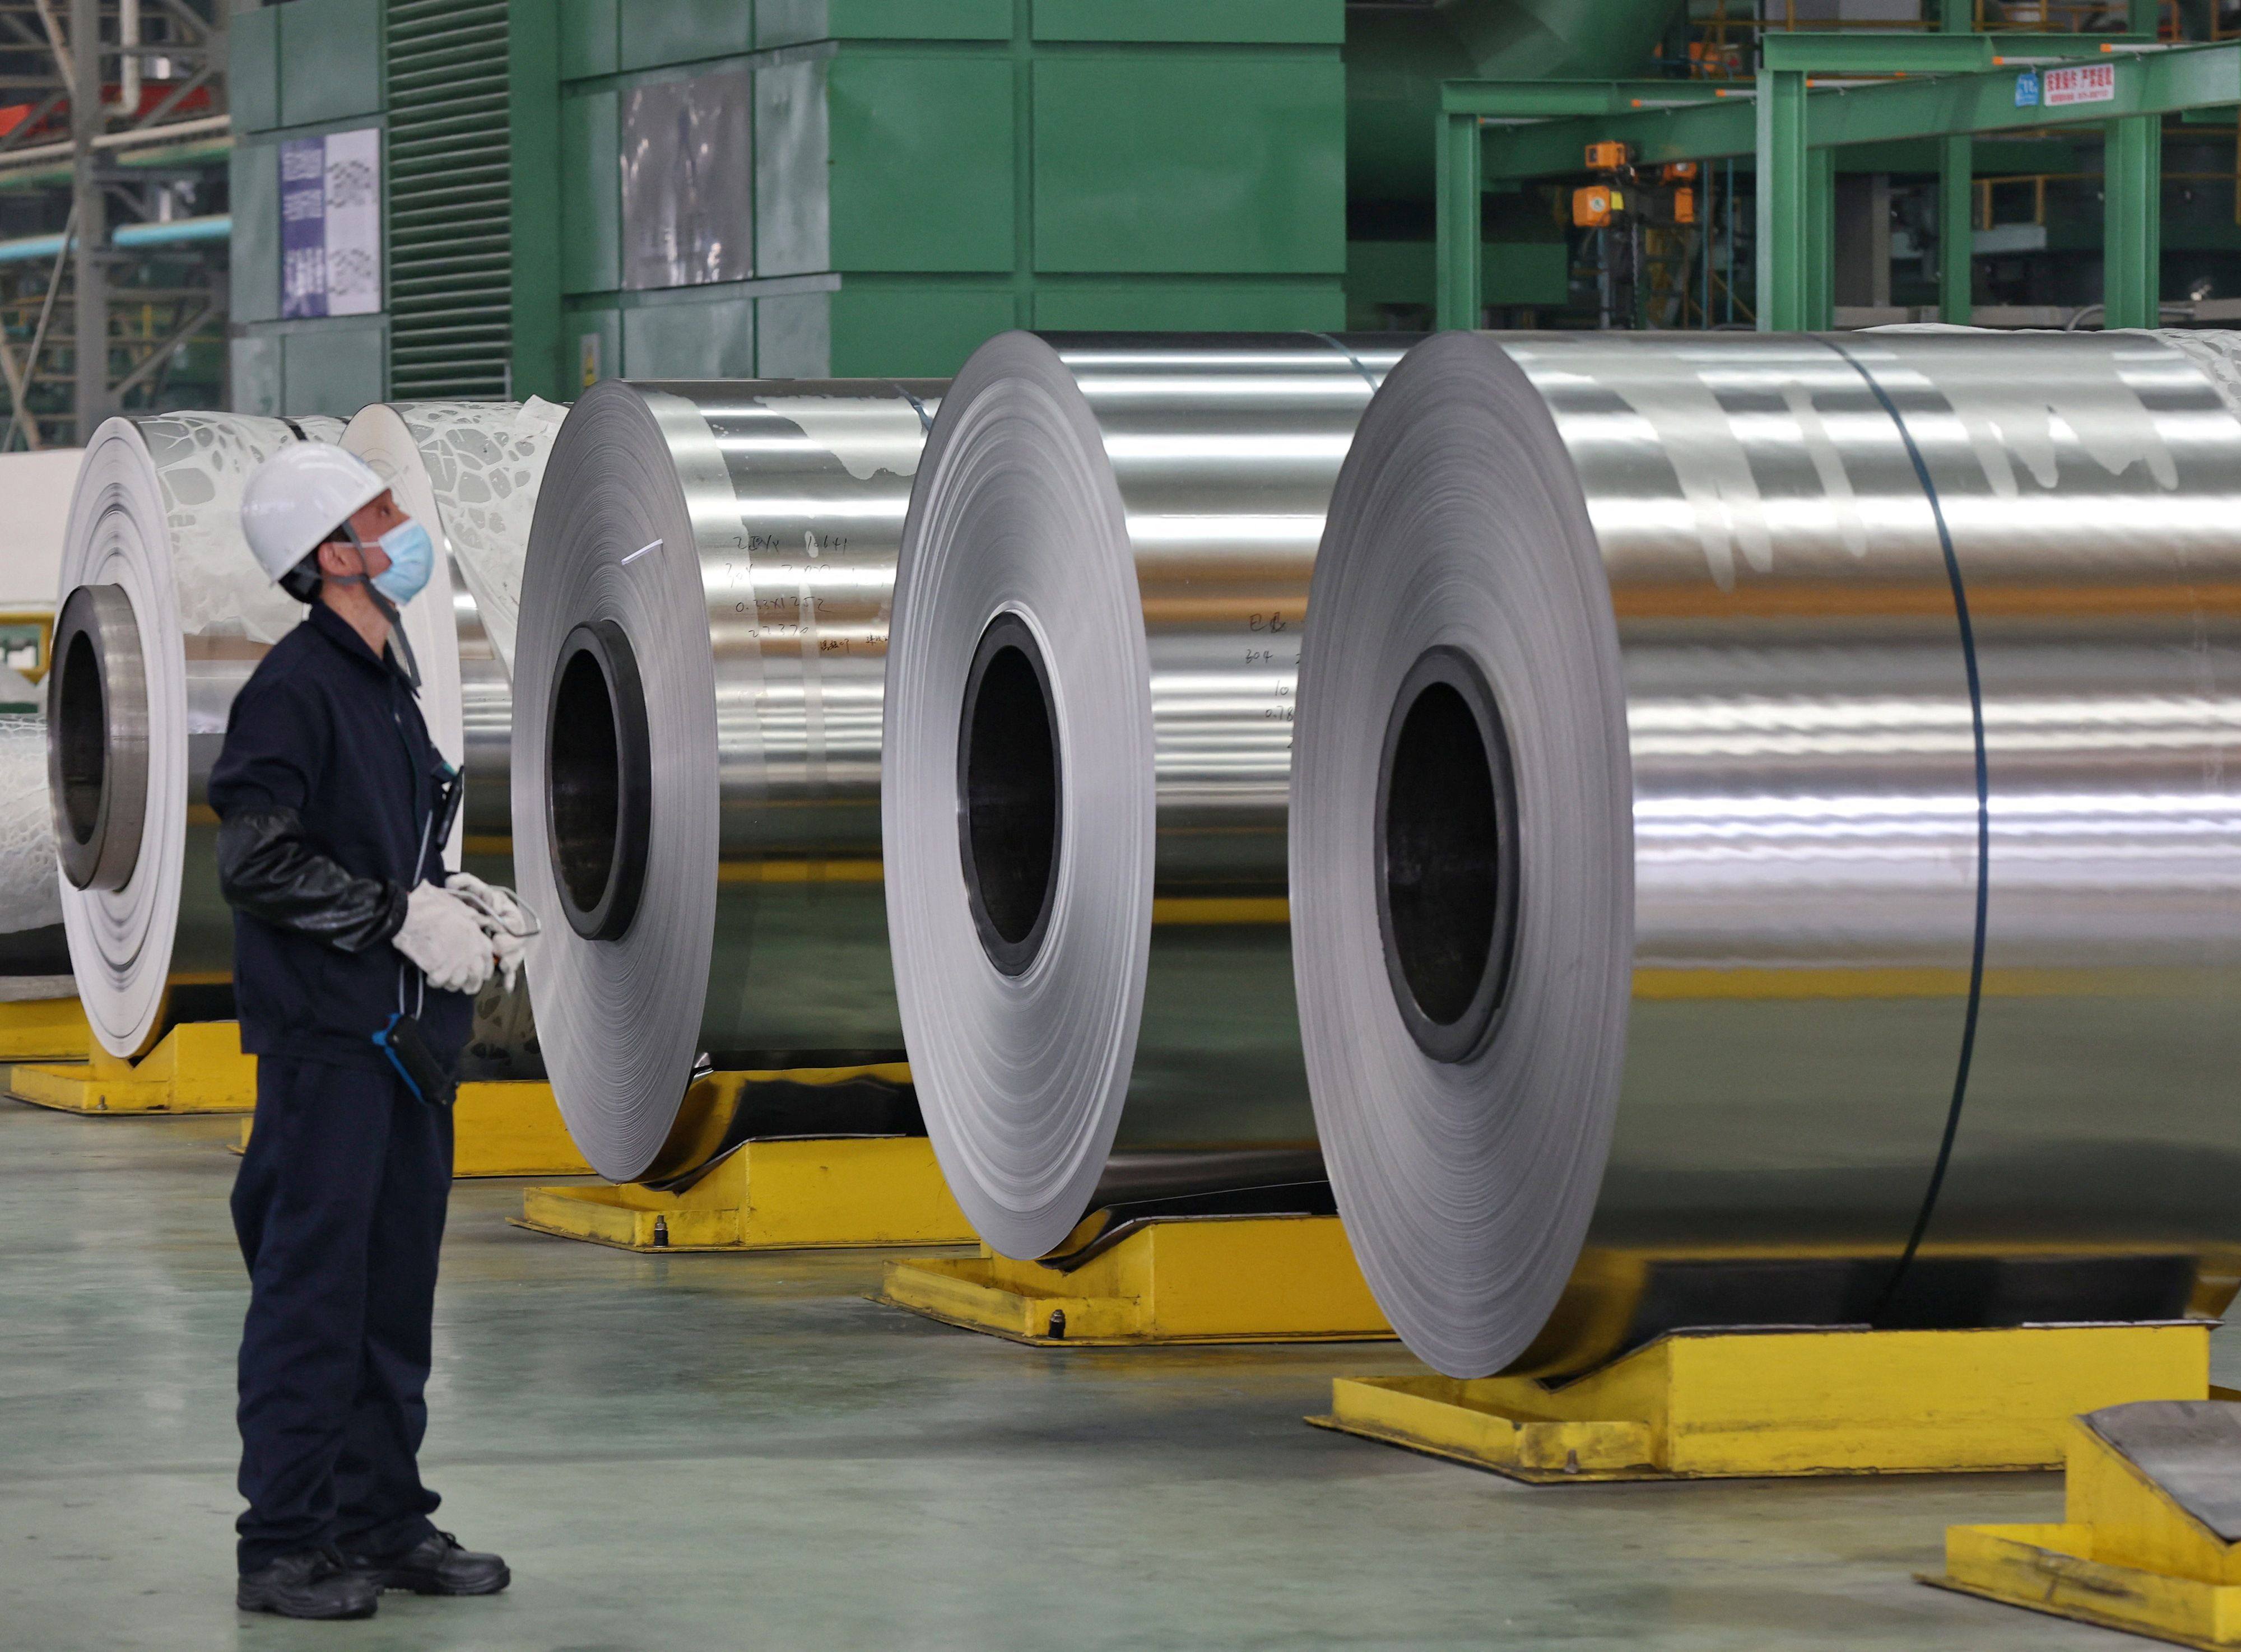 An employee looks on at steel rolls at a factory in Nantong in China’s eastern Jiangsu province in March 2022. Photo: AFP